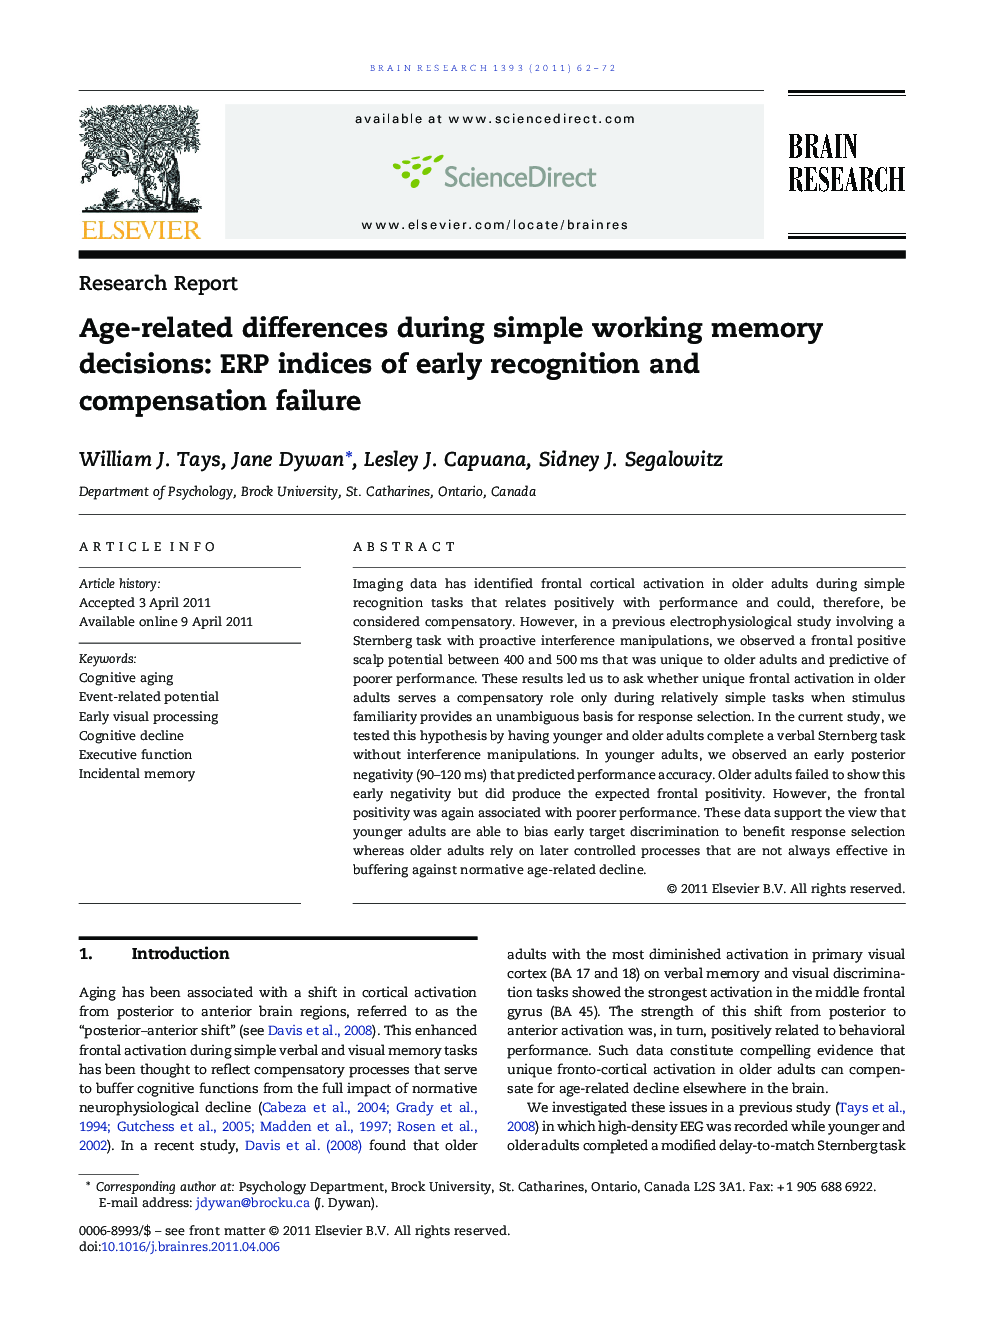 Research ReportAge-related differences during simple working memory decisions: ERP indices of early recognition and compensation failure